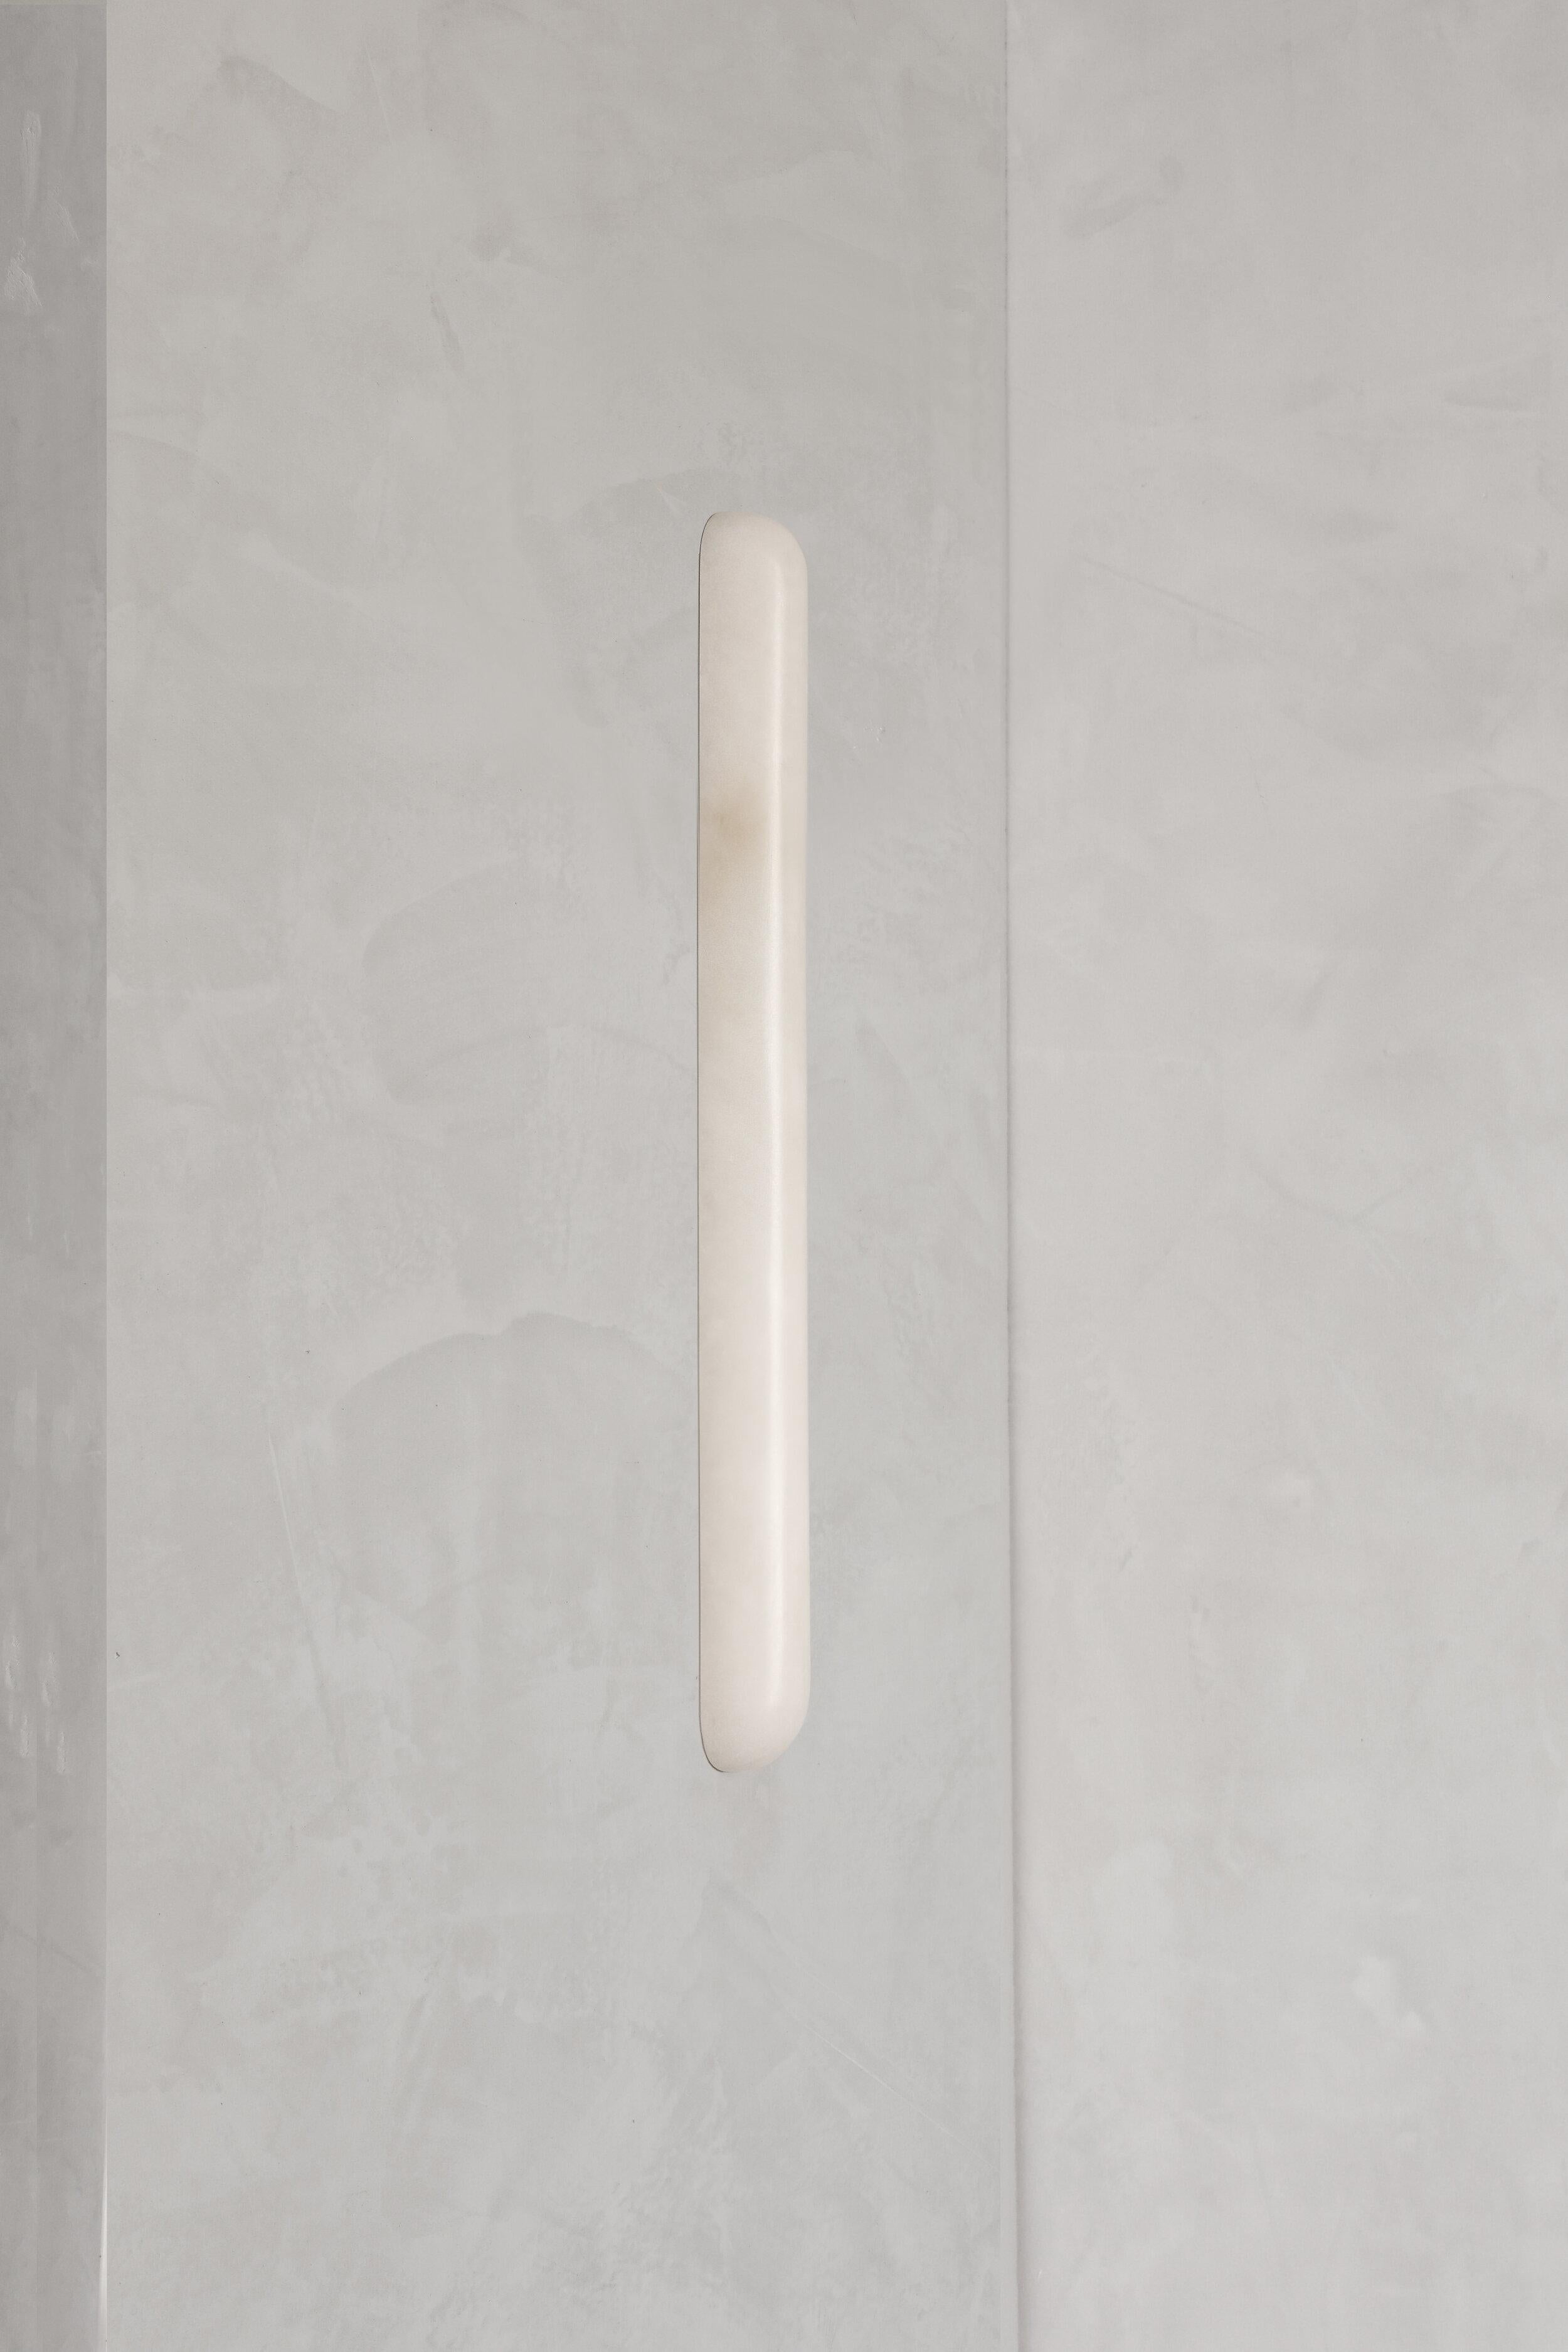 Tub 45 Alabaster wall light by Contain
Dimensions: D 4 x W4 x H45 cm
Materials: Alabaster
Also available in different dimensions.

All our lamps can be wired according to each country. If sold to the USA it will be wired for the USA for